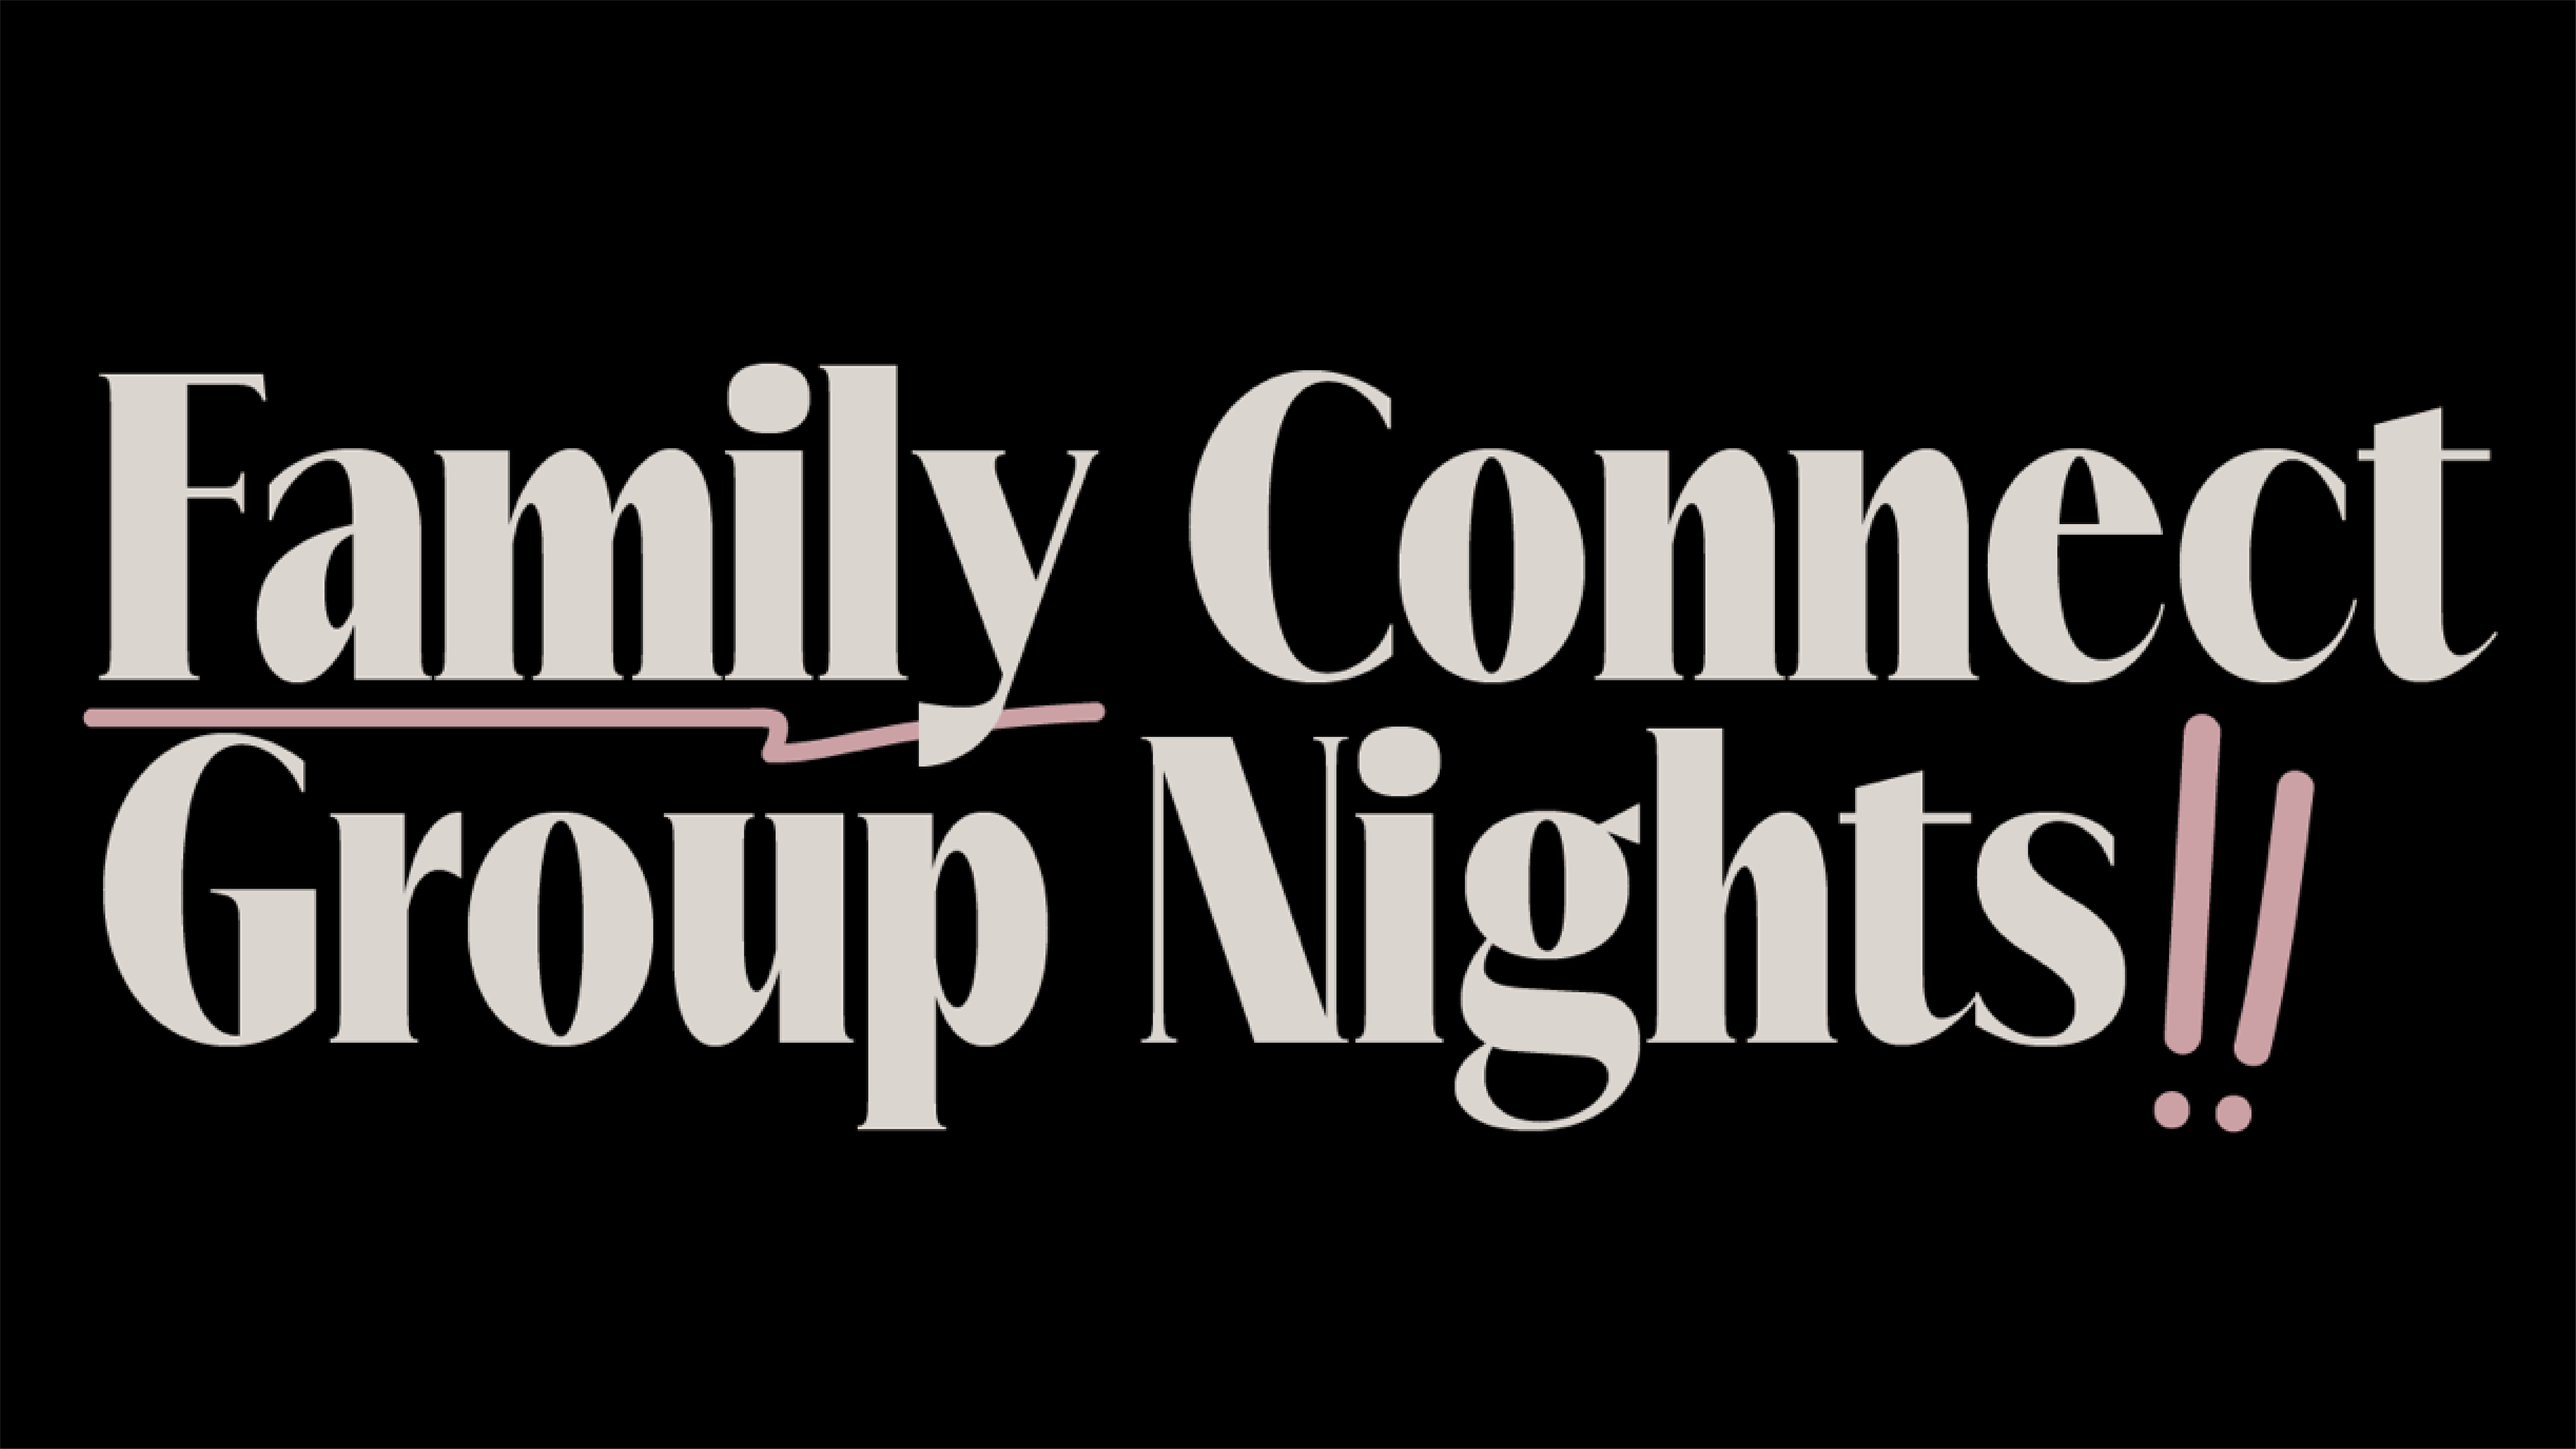 Family Connect Group Nights at the Orange County campus